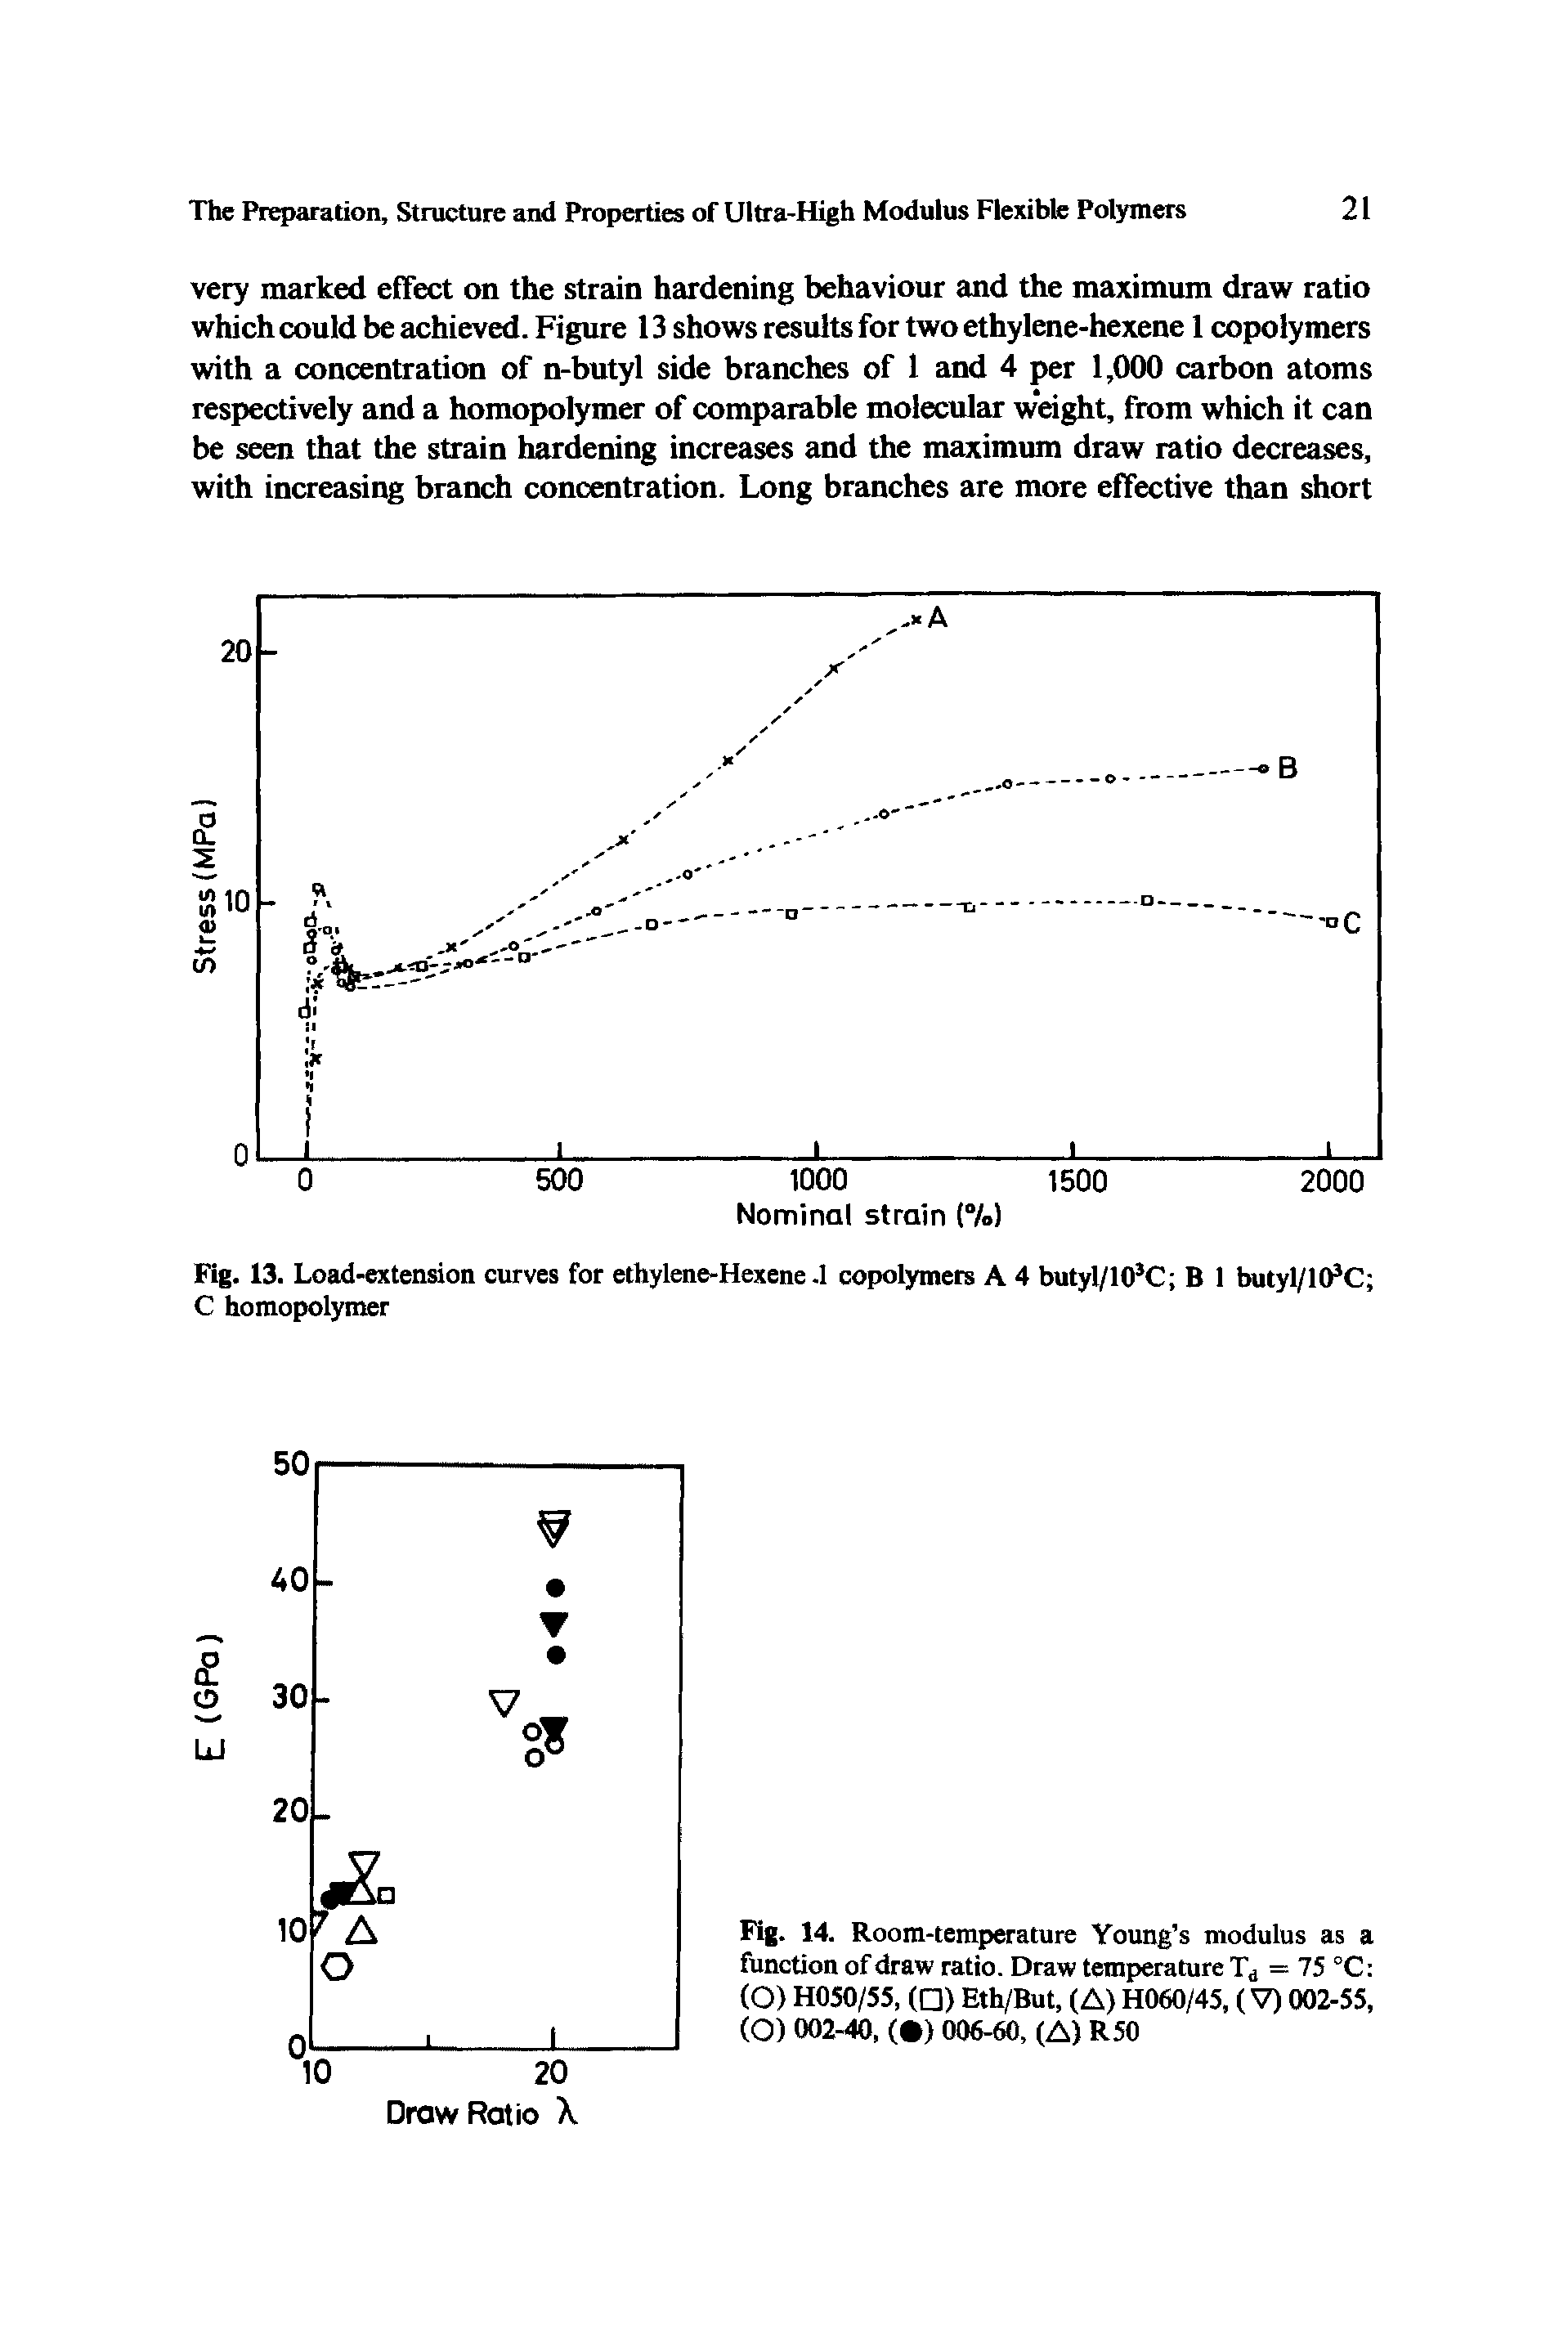 Fig. 13. Load-extension curves for ethylene-Hexene. 1 copolymers A 4 butyl/103C B 1 butyl/10 0 C homopolymer...